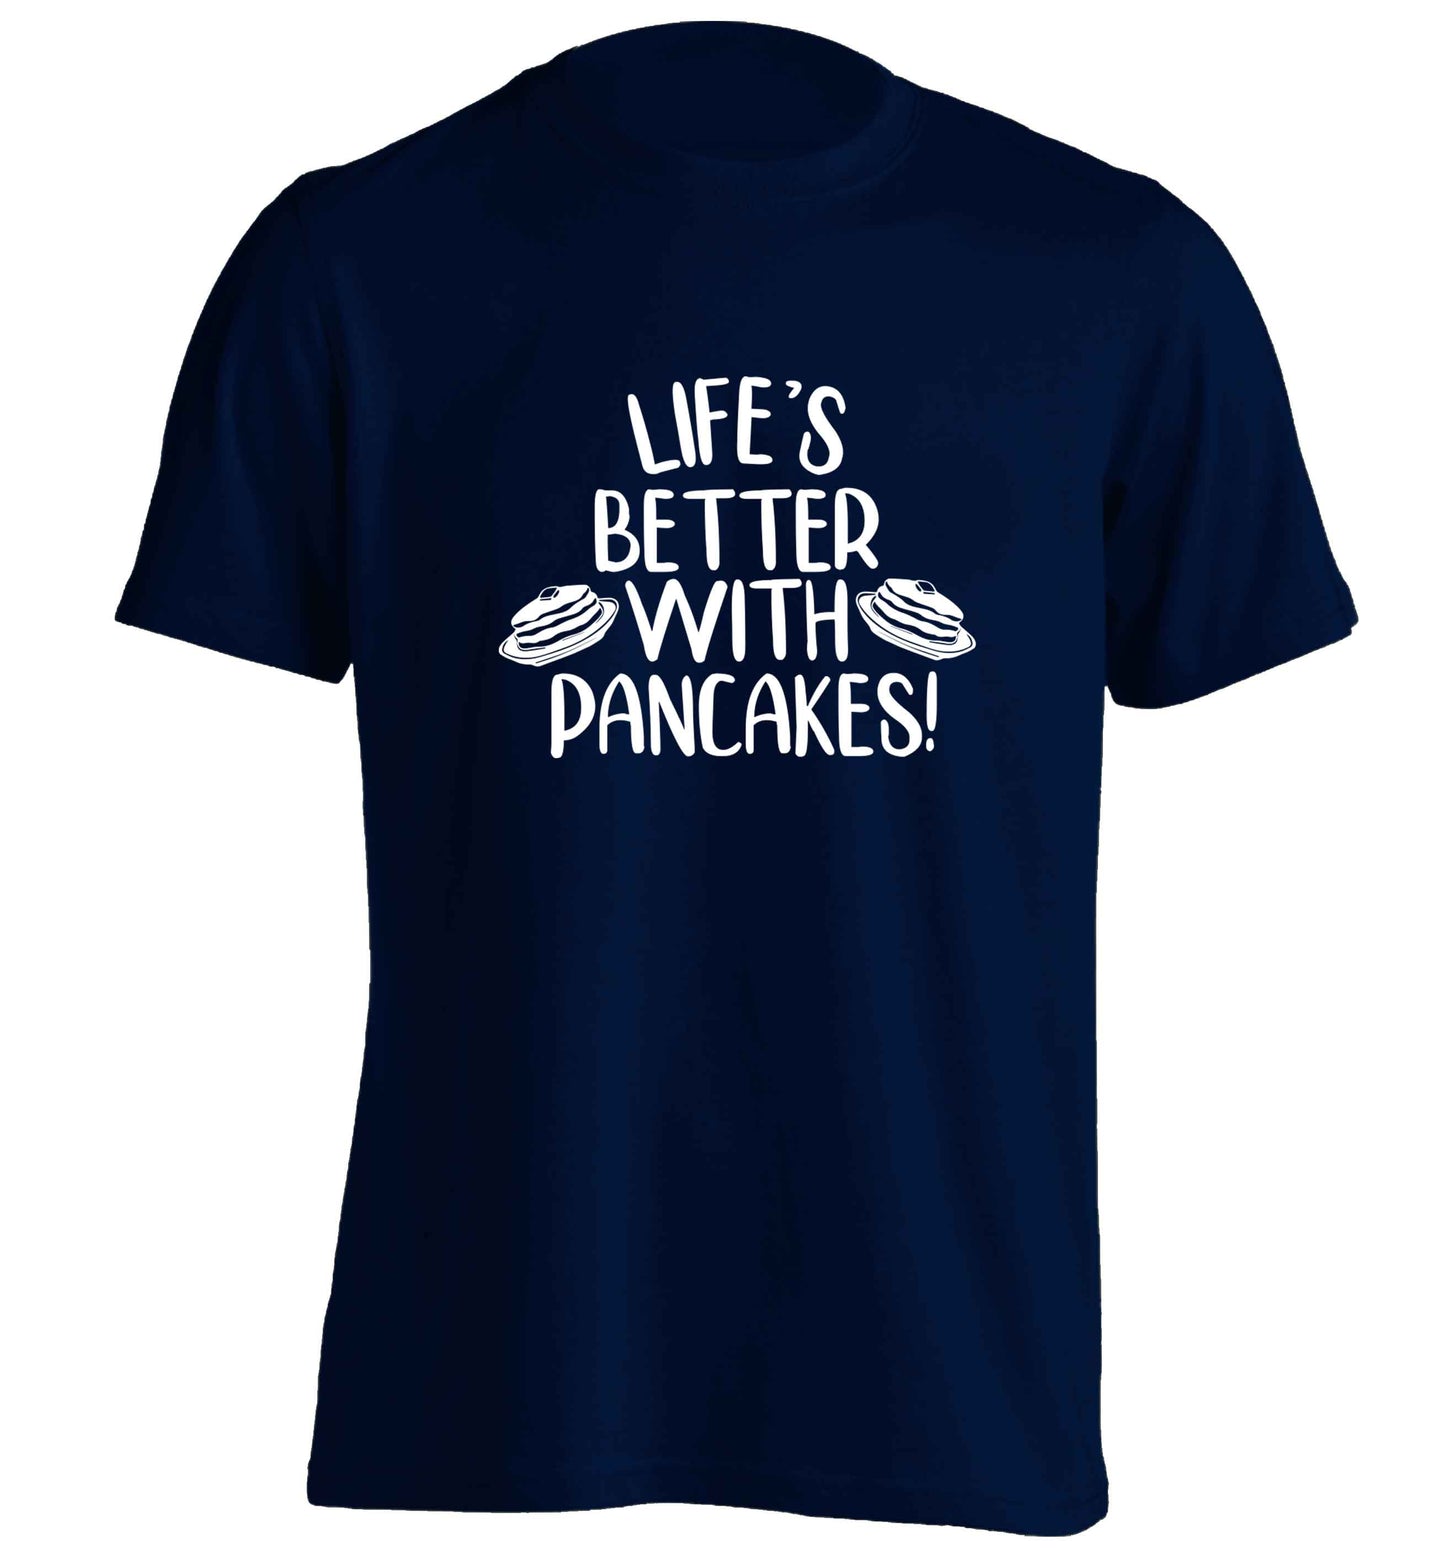 Life's better with pancakes adults unisex navy Tshirt 2XL